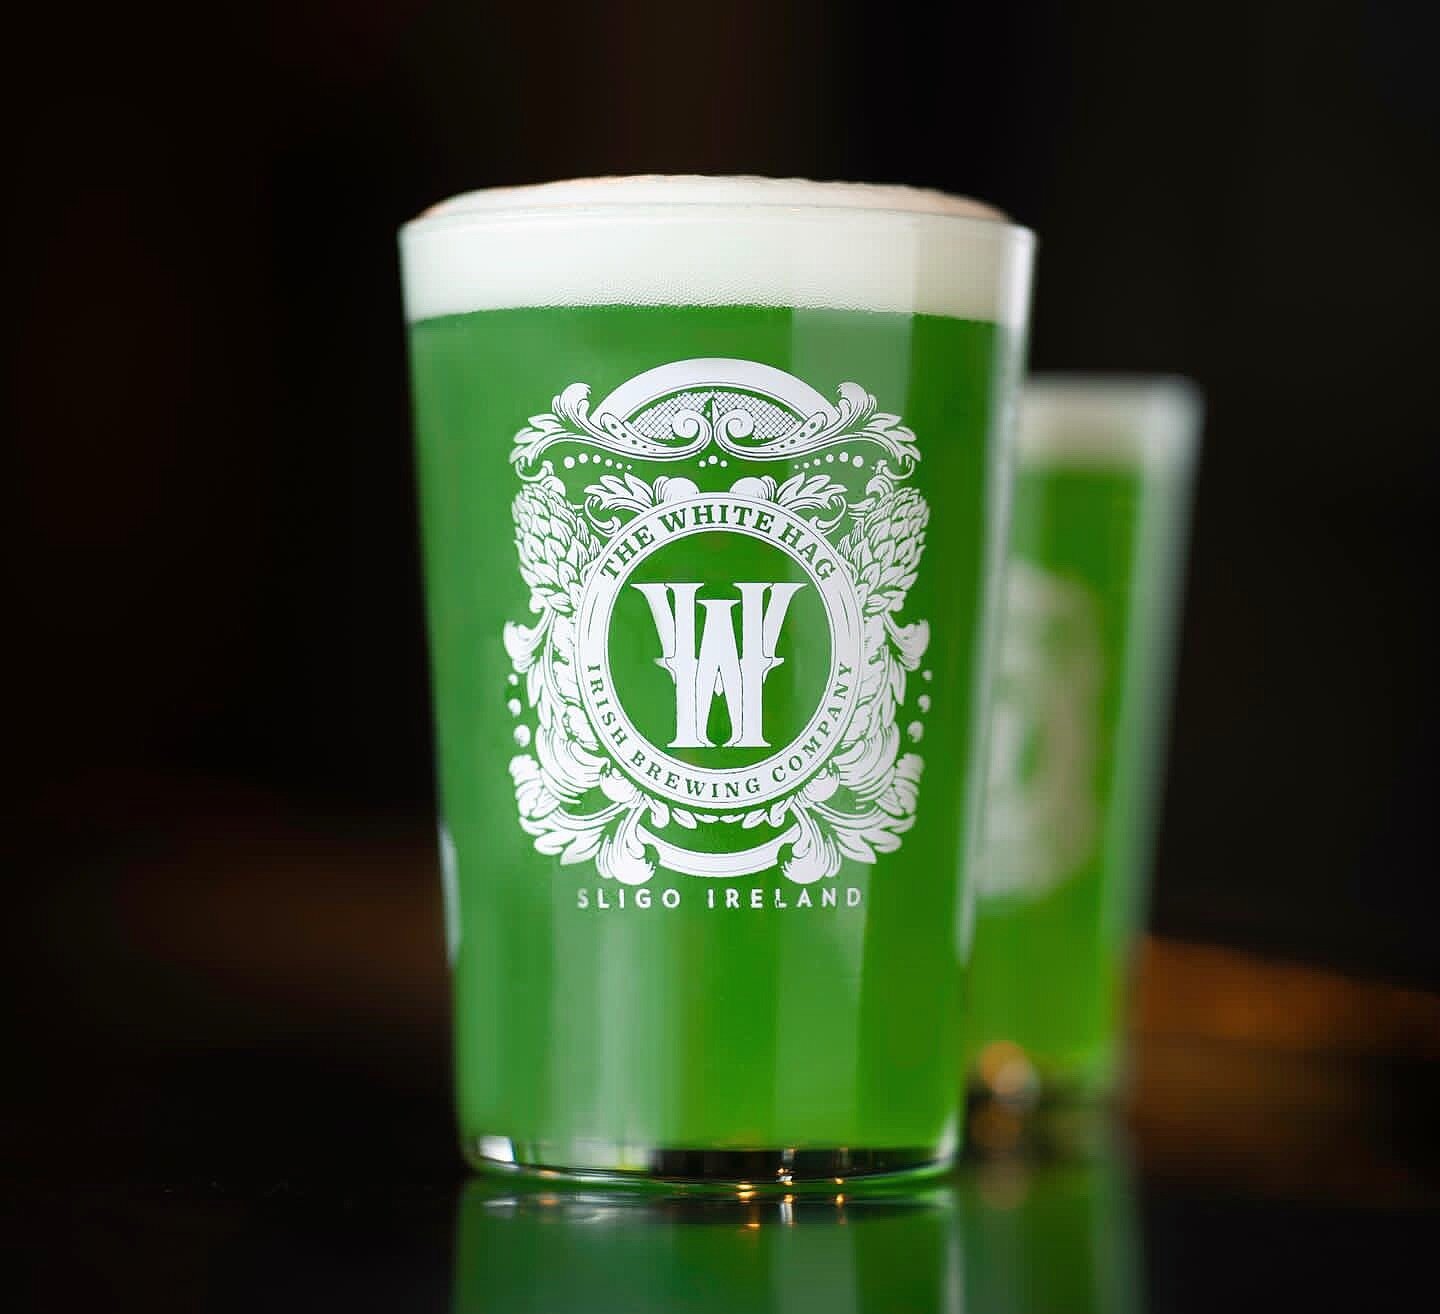 𝐓𝐡𝐞 𝐒𝐞𝐫𝐩𝐞𝐧𝐭 | 𝐆𝐫𝐞𝐞𝐧 𝐏𝐚𝐥𝐞 𝐀𝐥𝐞 | 𝟒.𝟓% ☘️
A brand new beer from the folks at @thewhitehag pouring this St Patrick&rsquo;s Weekend! 🍺 

As with all our guest beers we have just the one keg in. Once it&rsquo;s gone it&rsquo;s gone